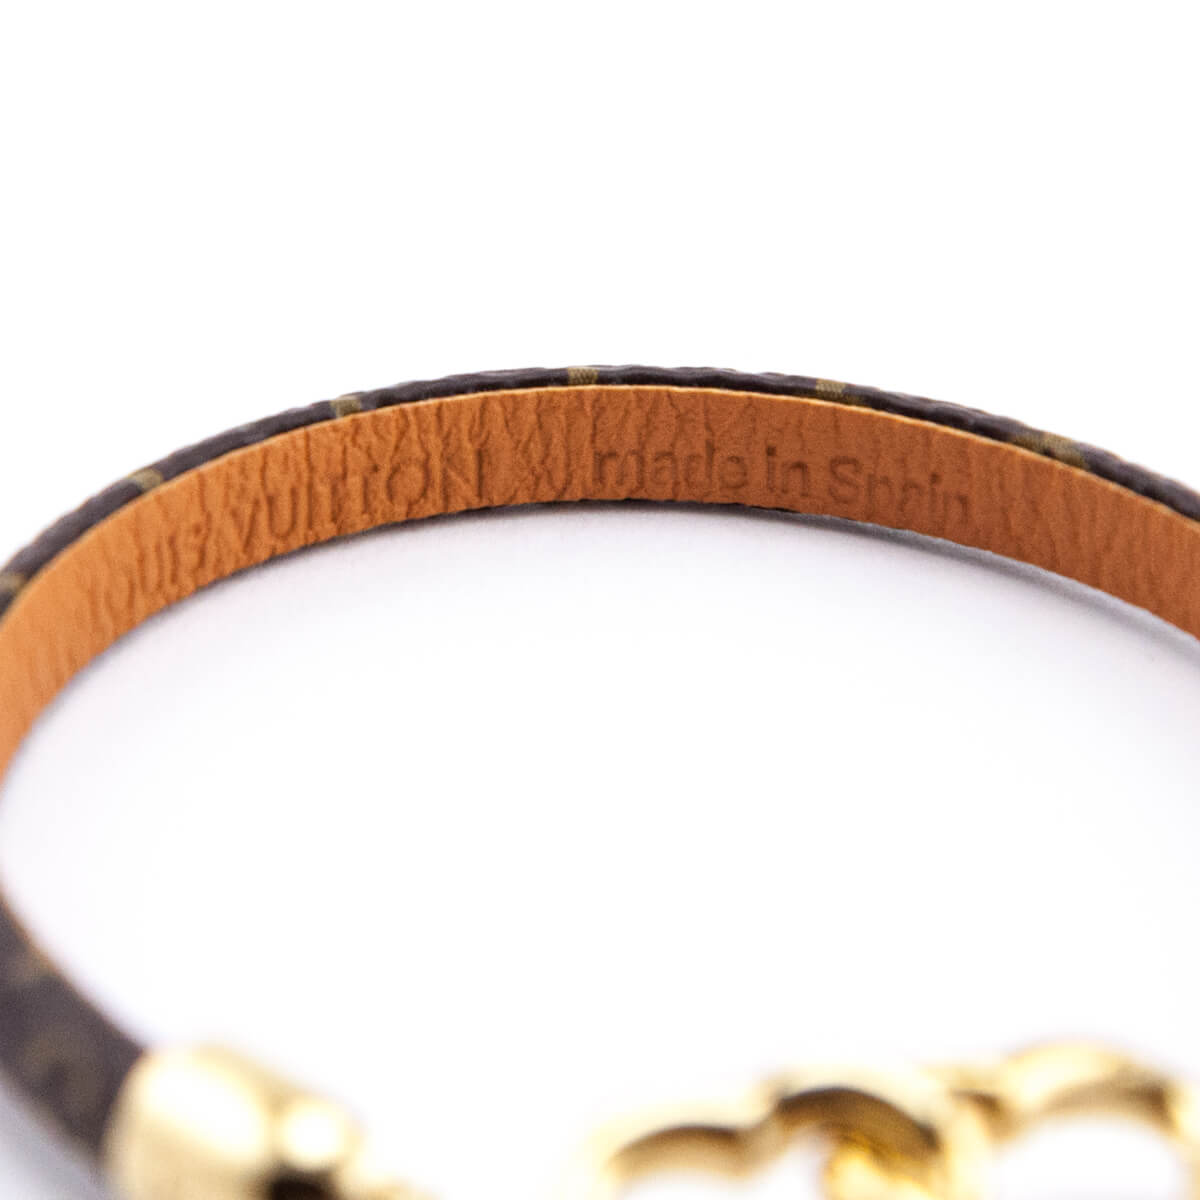 Louis Vuitton Say Yes - For Sale on 1stDibs  louis vuitton say yes bracelet,  lv say yes bracelet, bracelet say yes louis vuitton